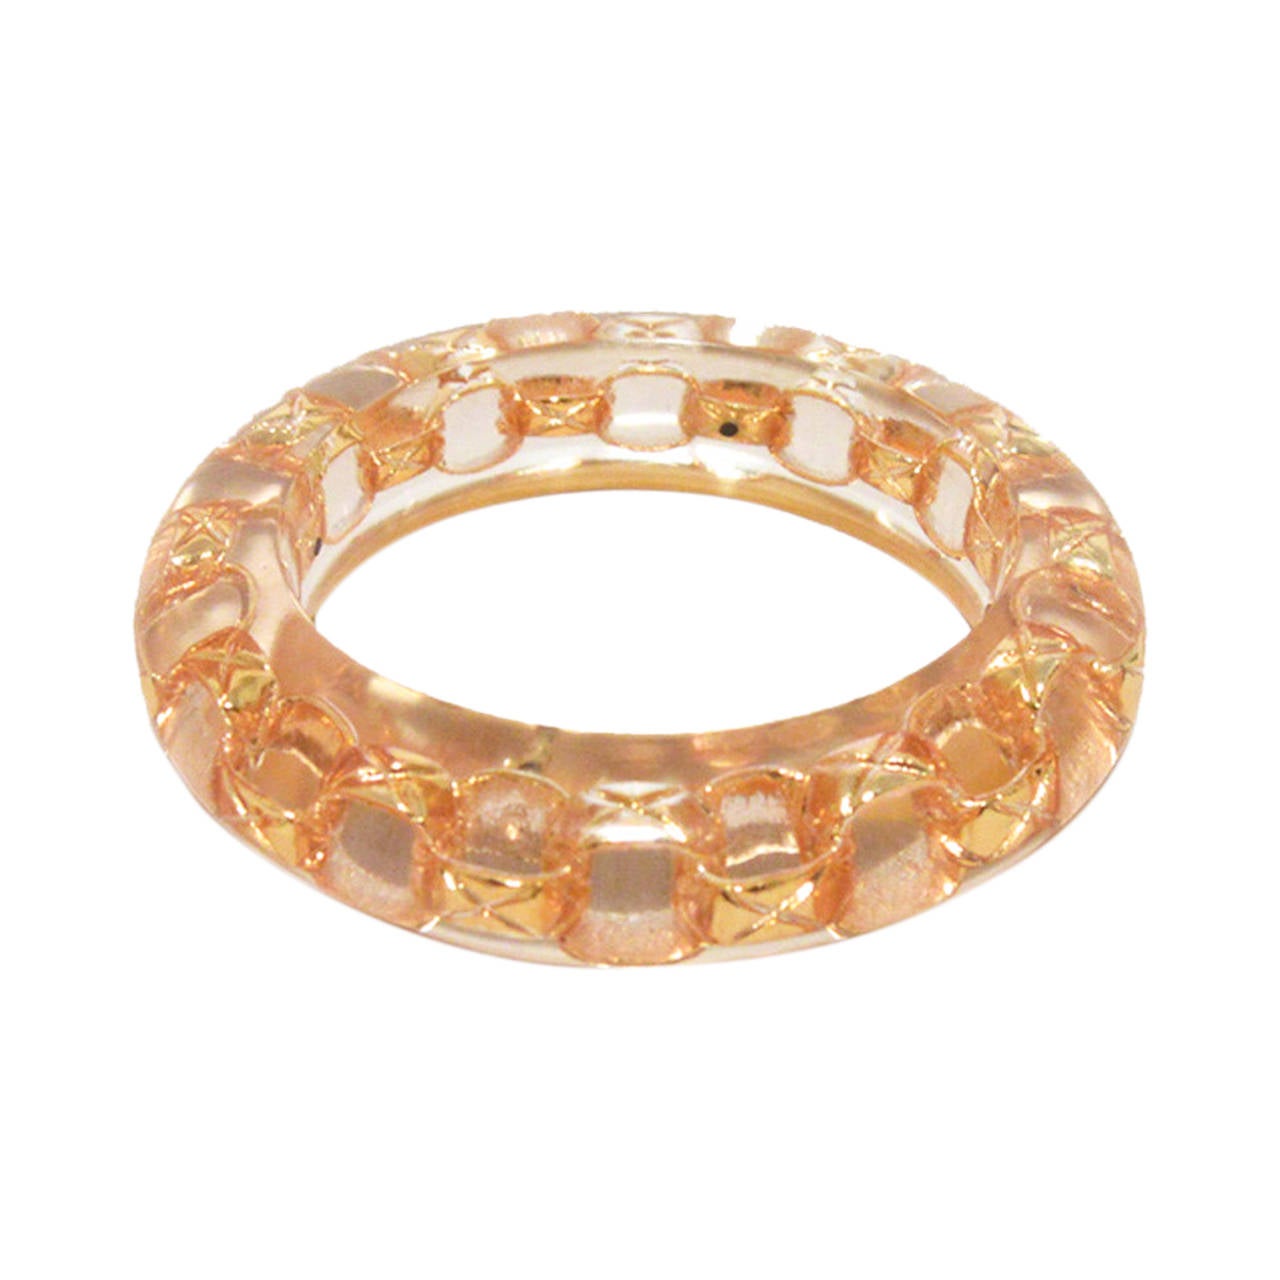 Chanel Clear Acrylic and Gold Chain Bangle Bracelet